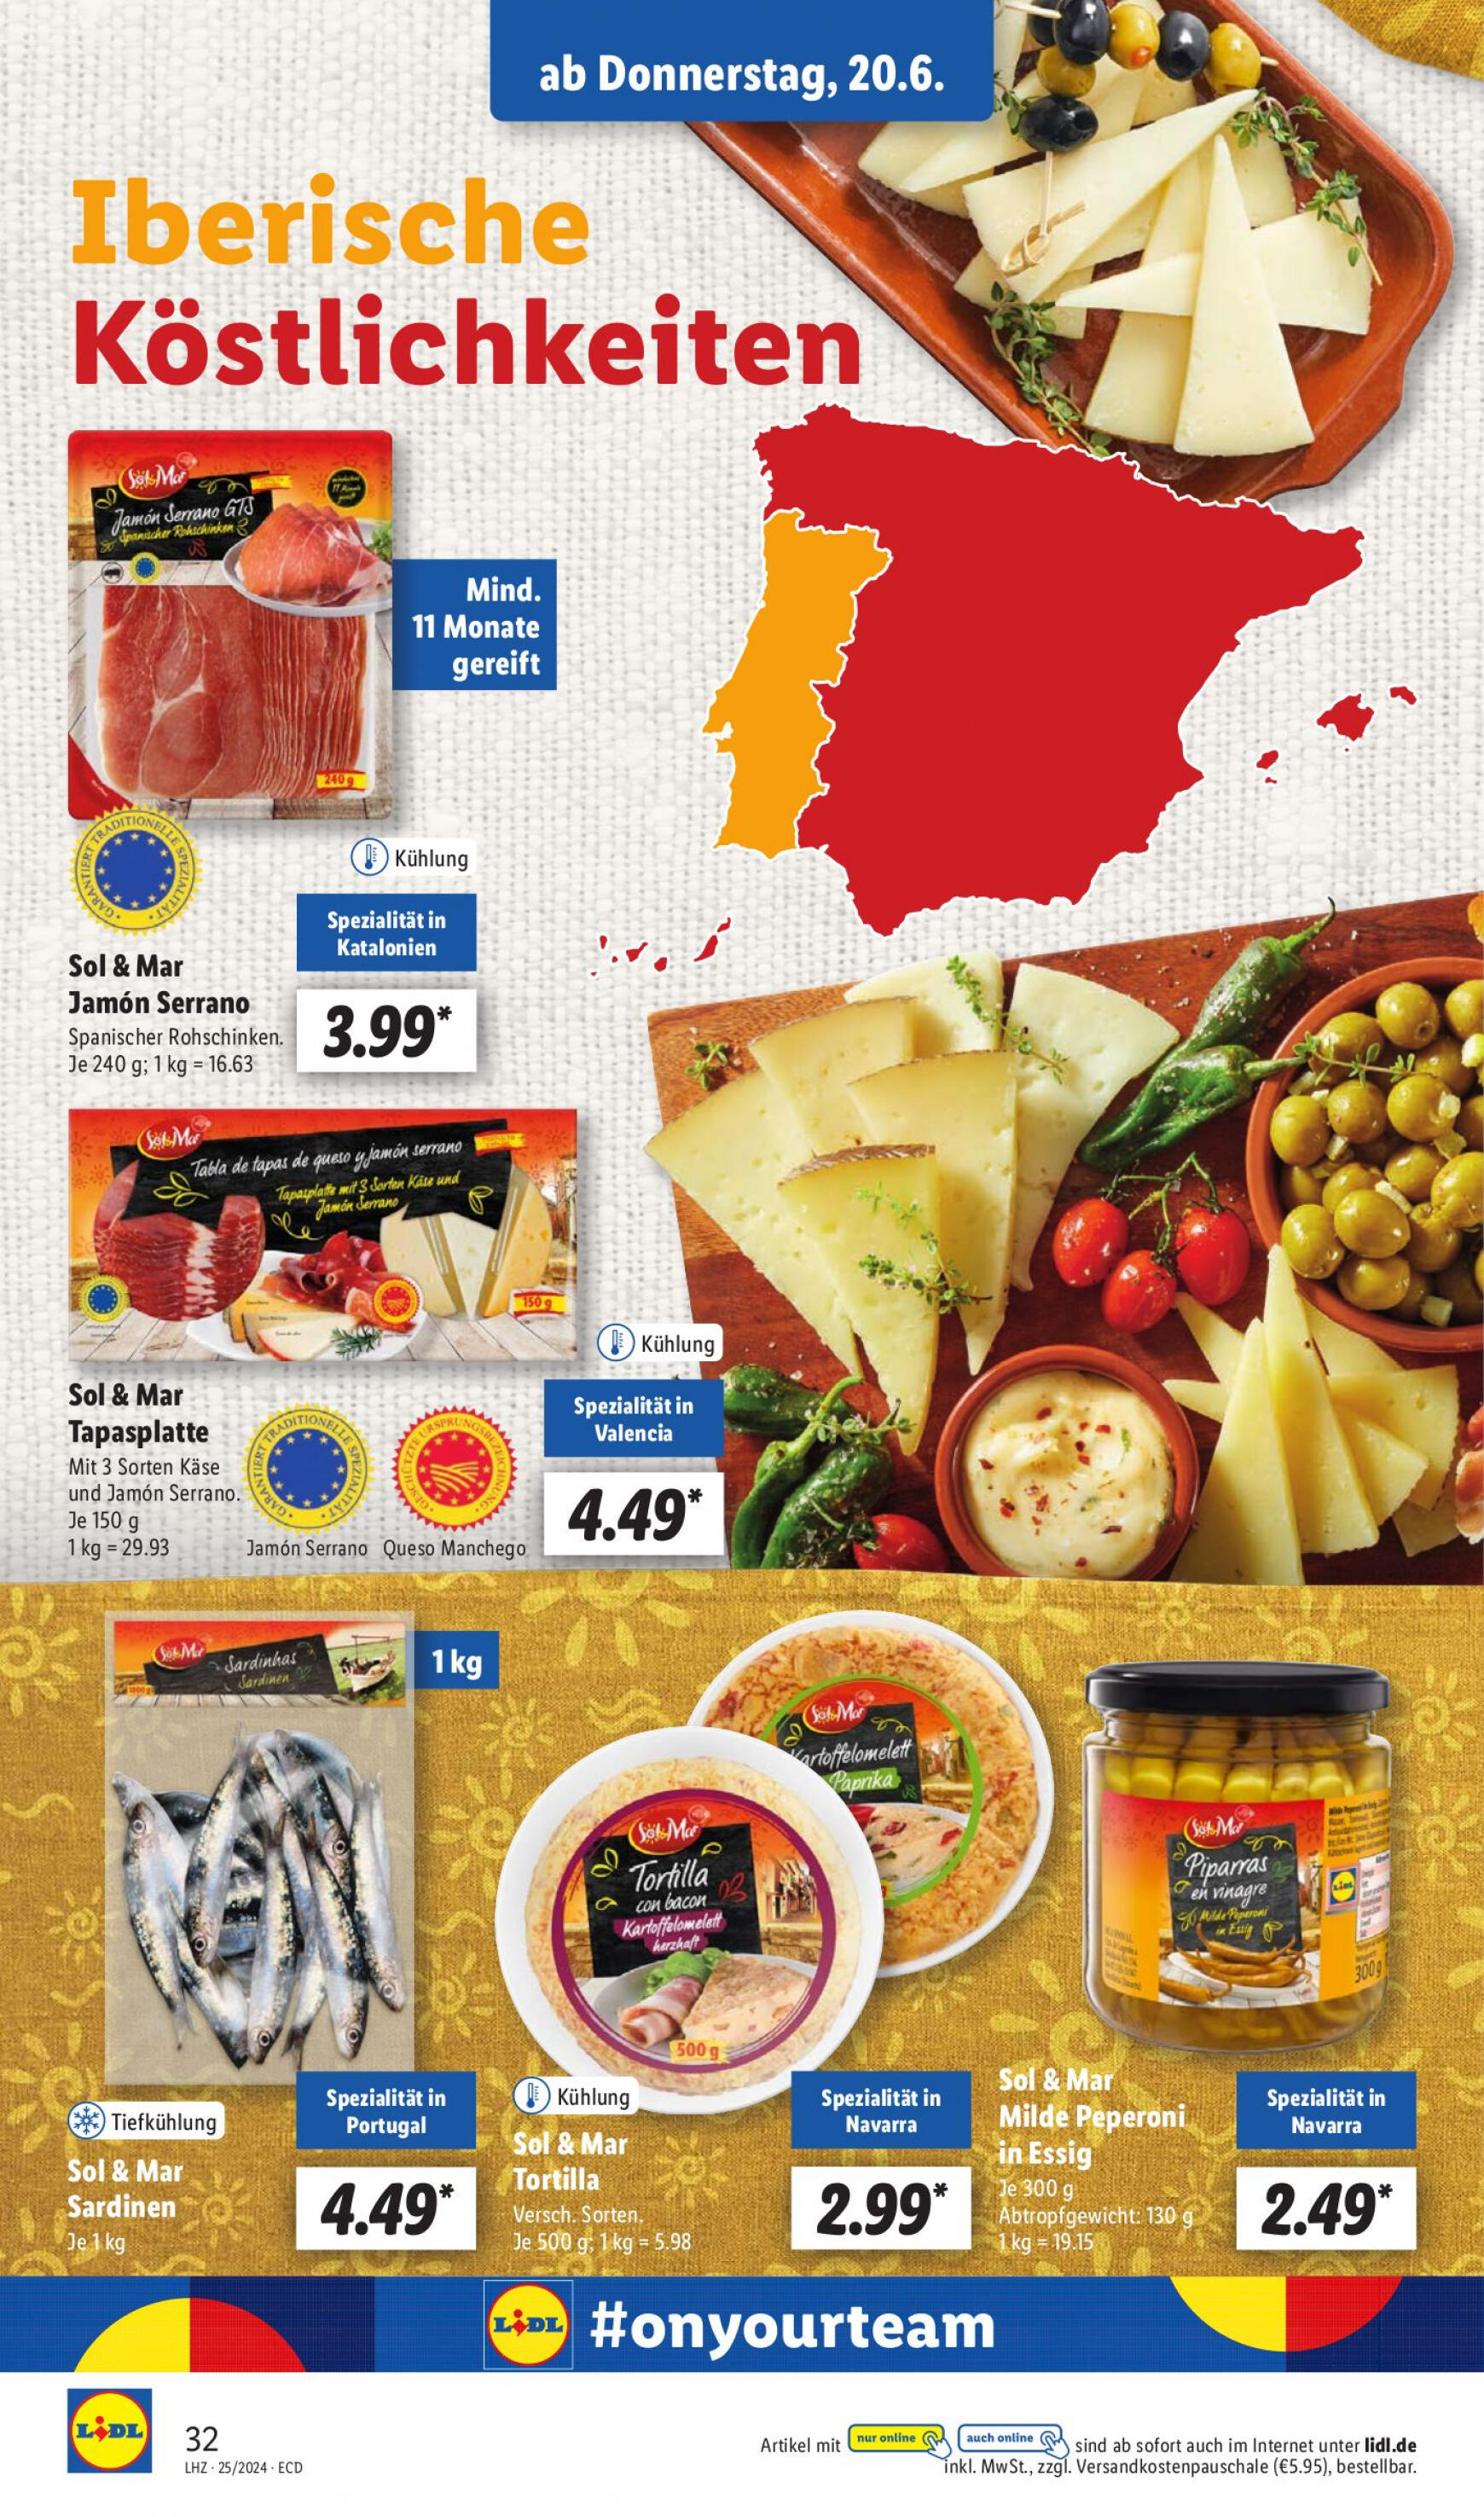 lidl - Flyer Lidl aktuell 17.06. - 22.06. - page: 42